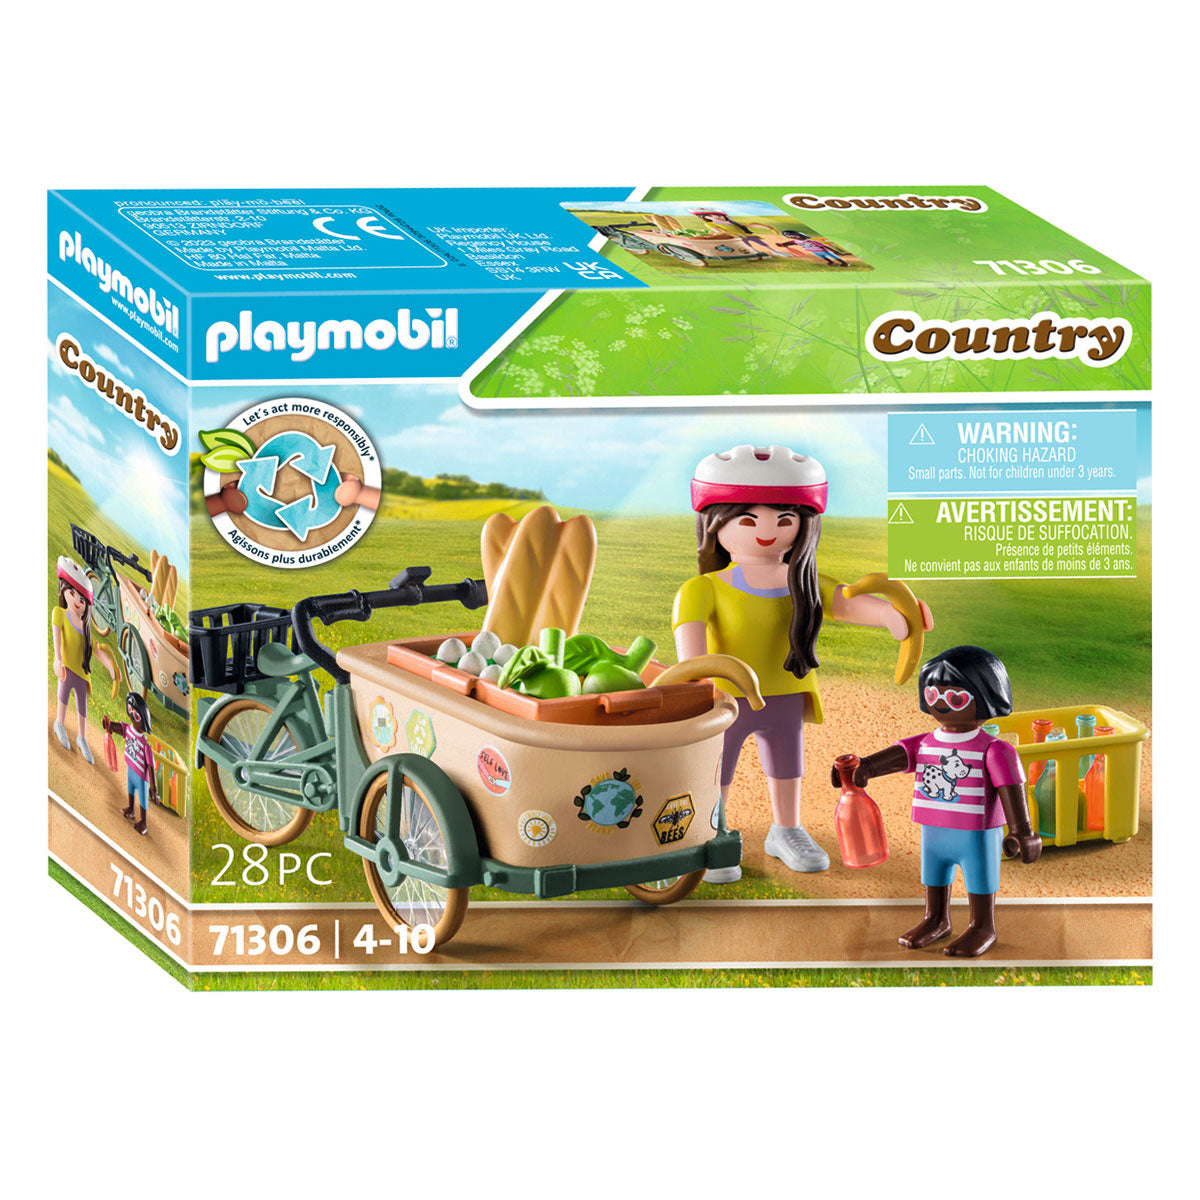 Playmobil Country Vrachtfiets 71306